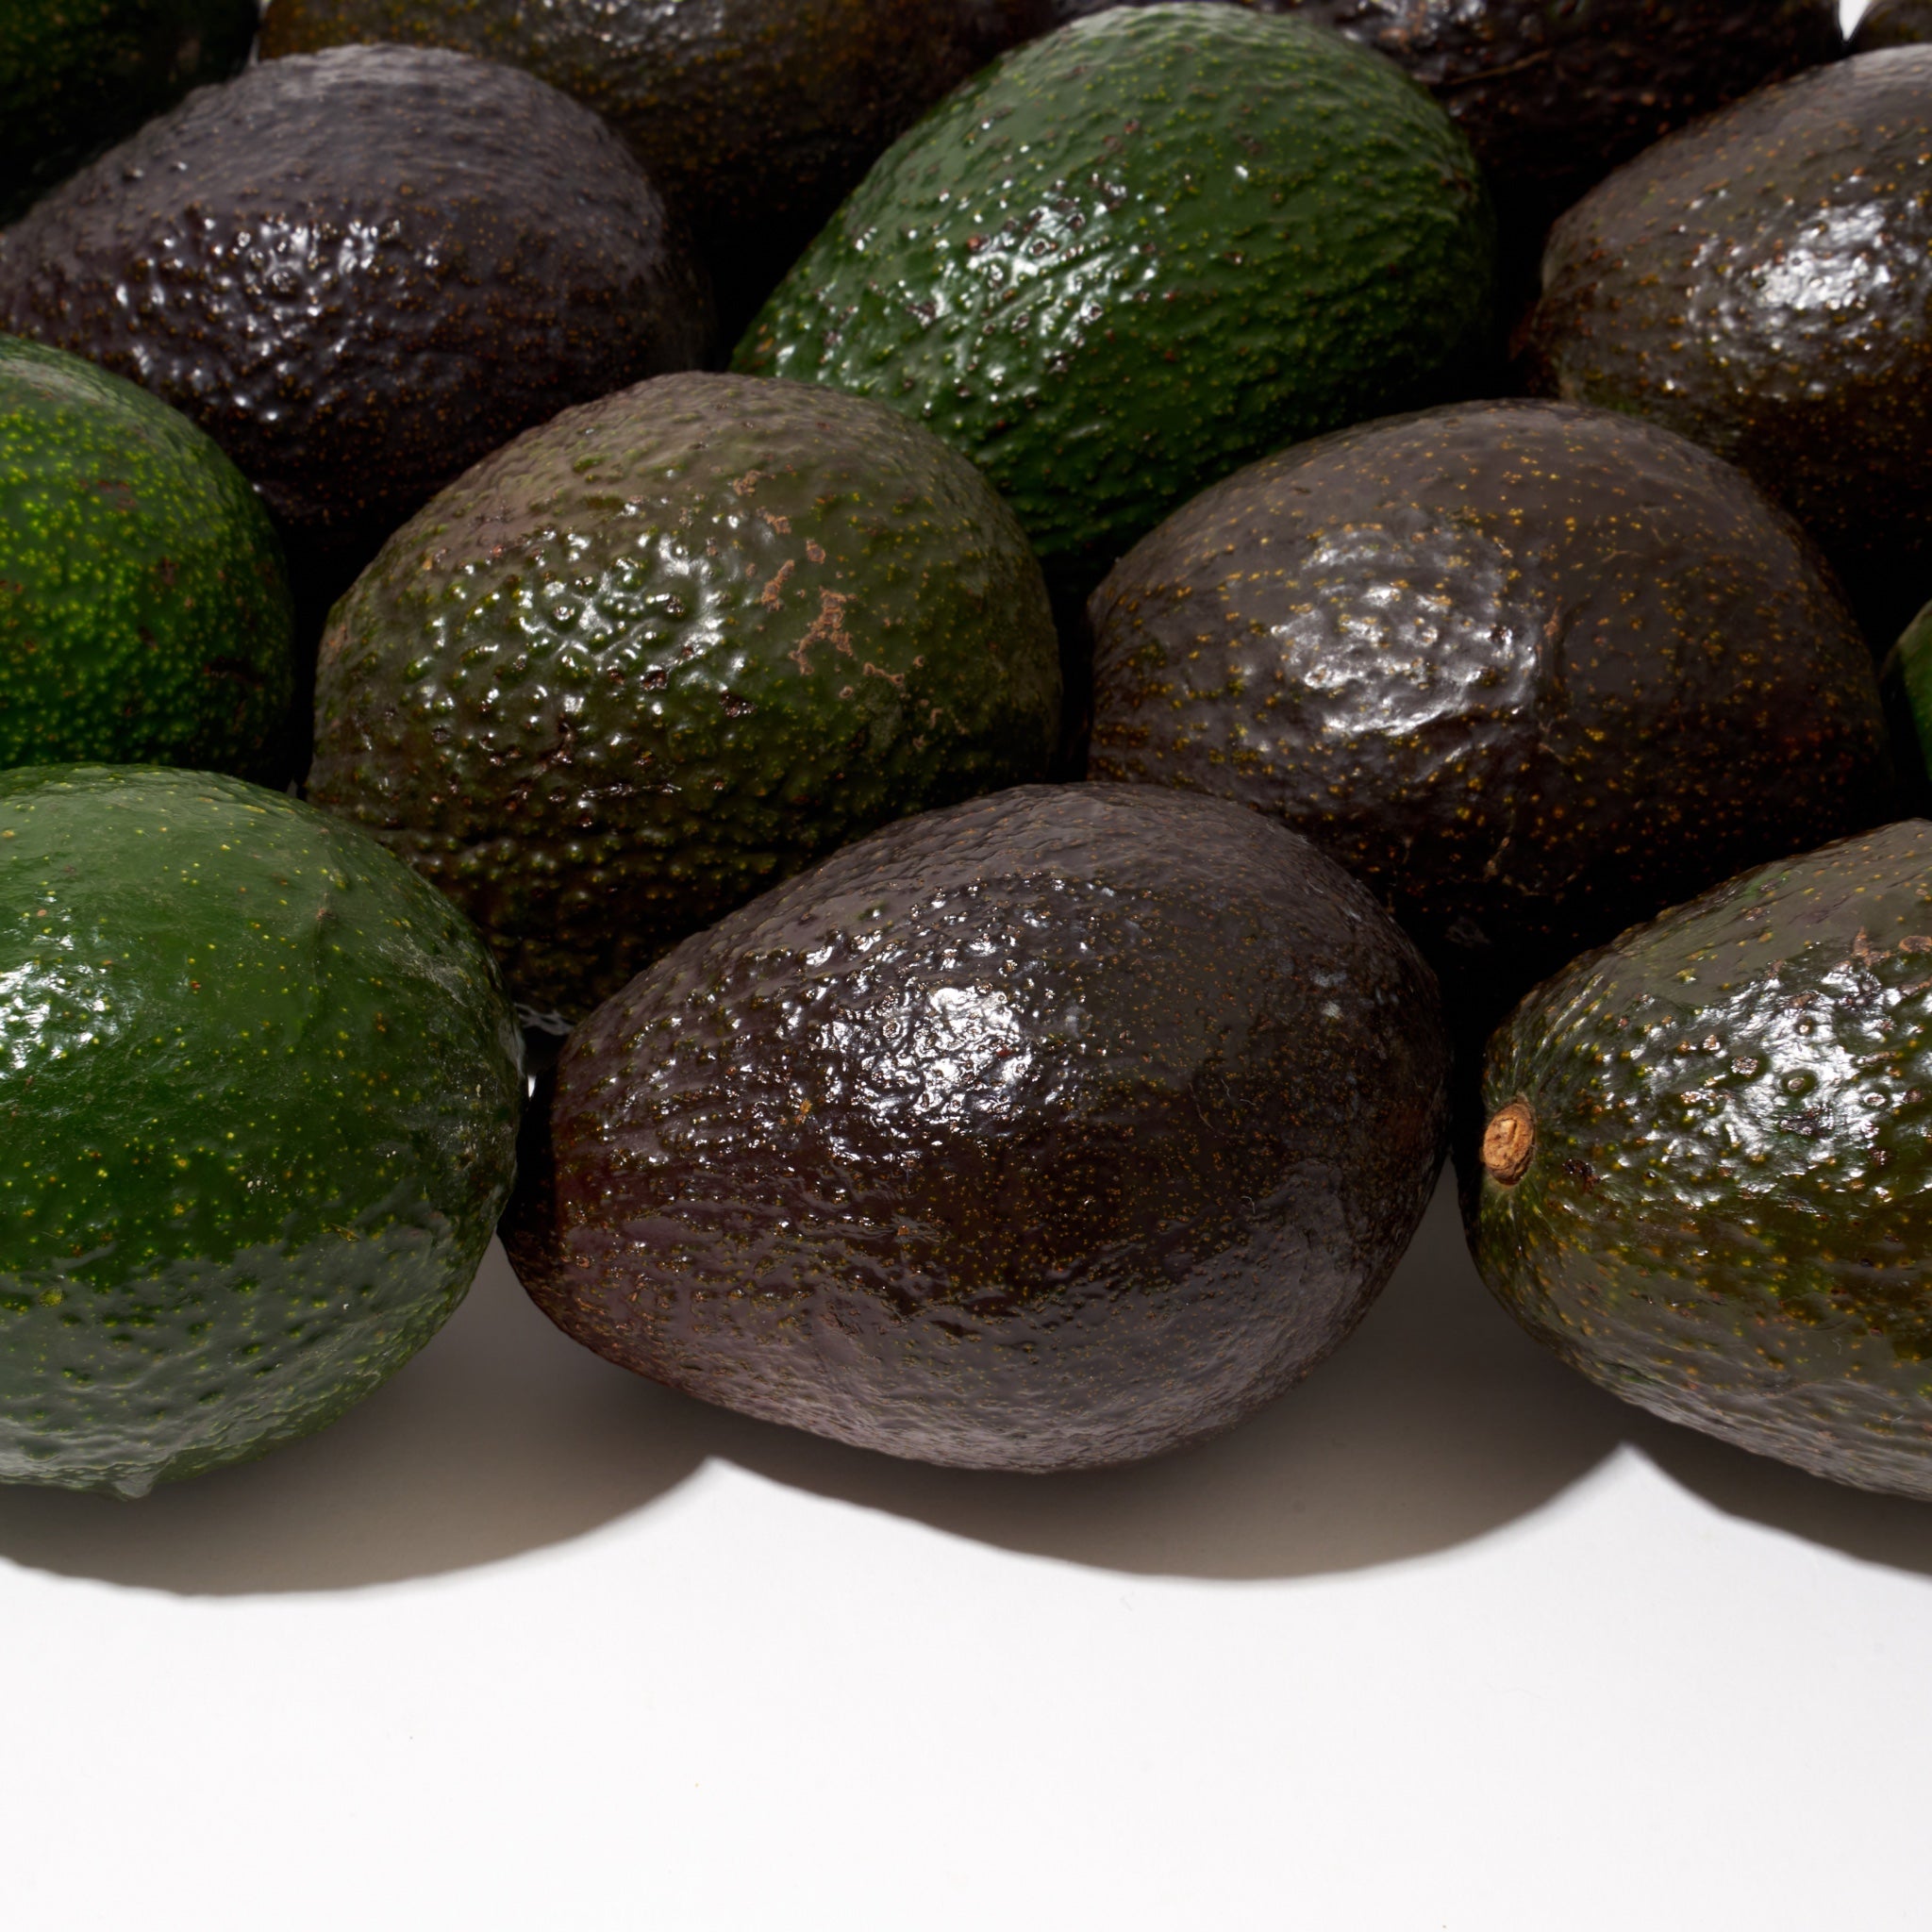 Neatly Arrange perfect avocados from Davocadoguy